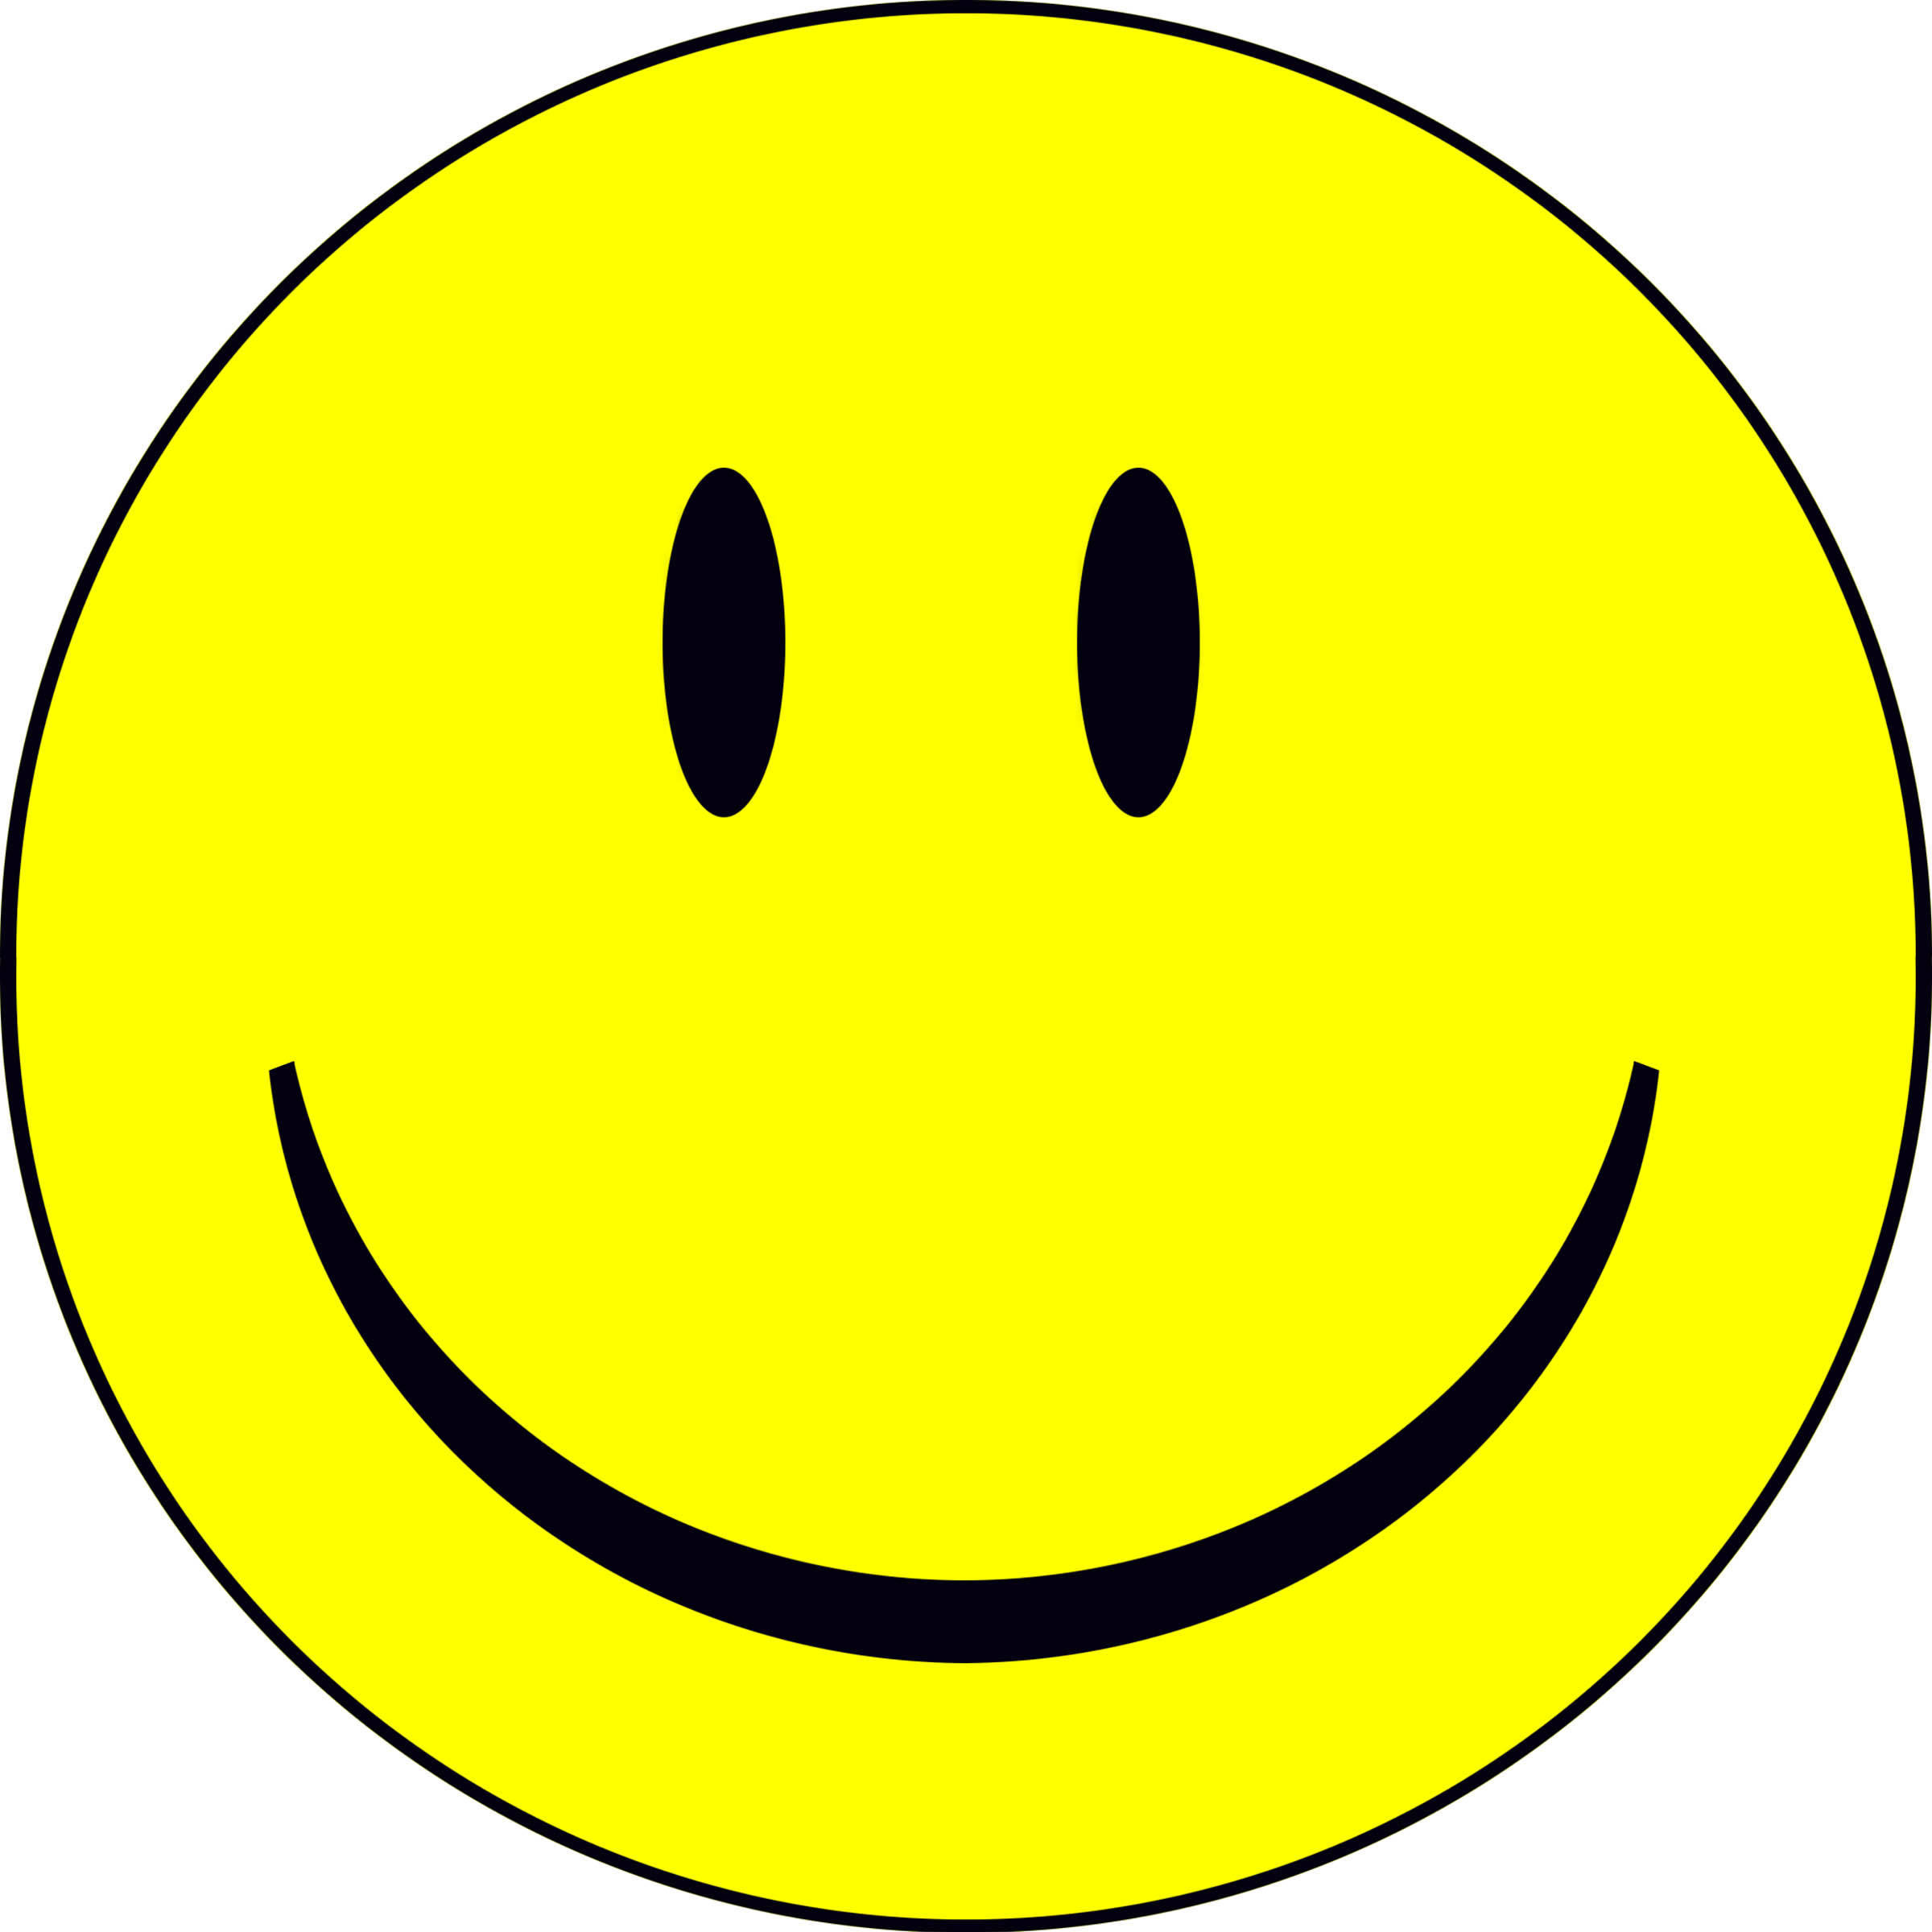 26 Big Smiley Face Picture Free Cliparts That You Can Download To You